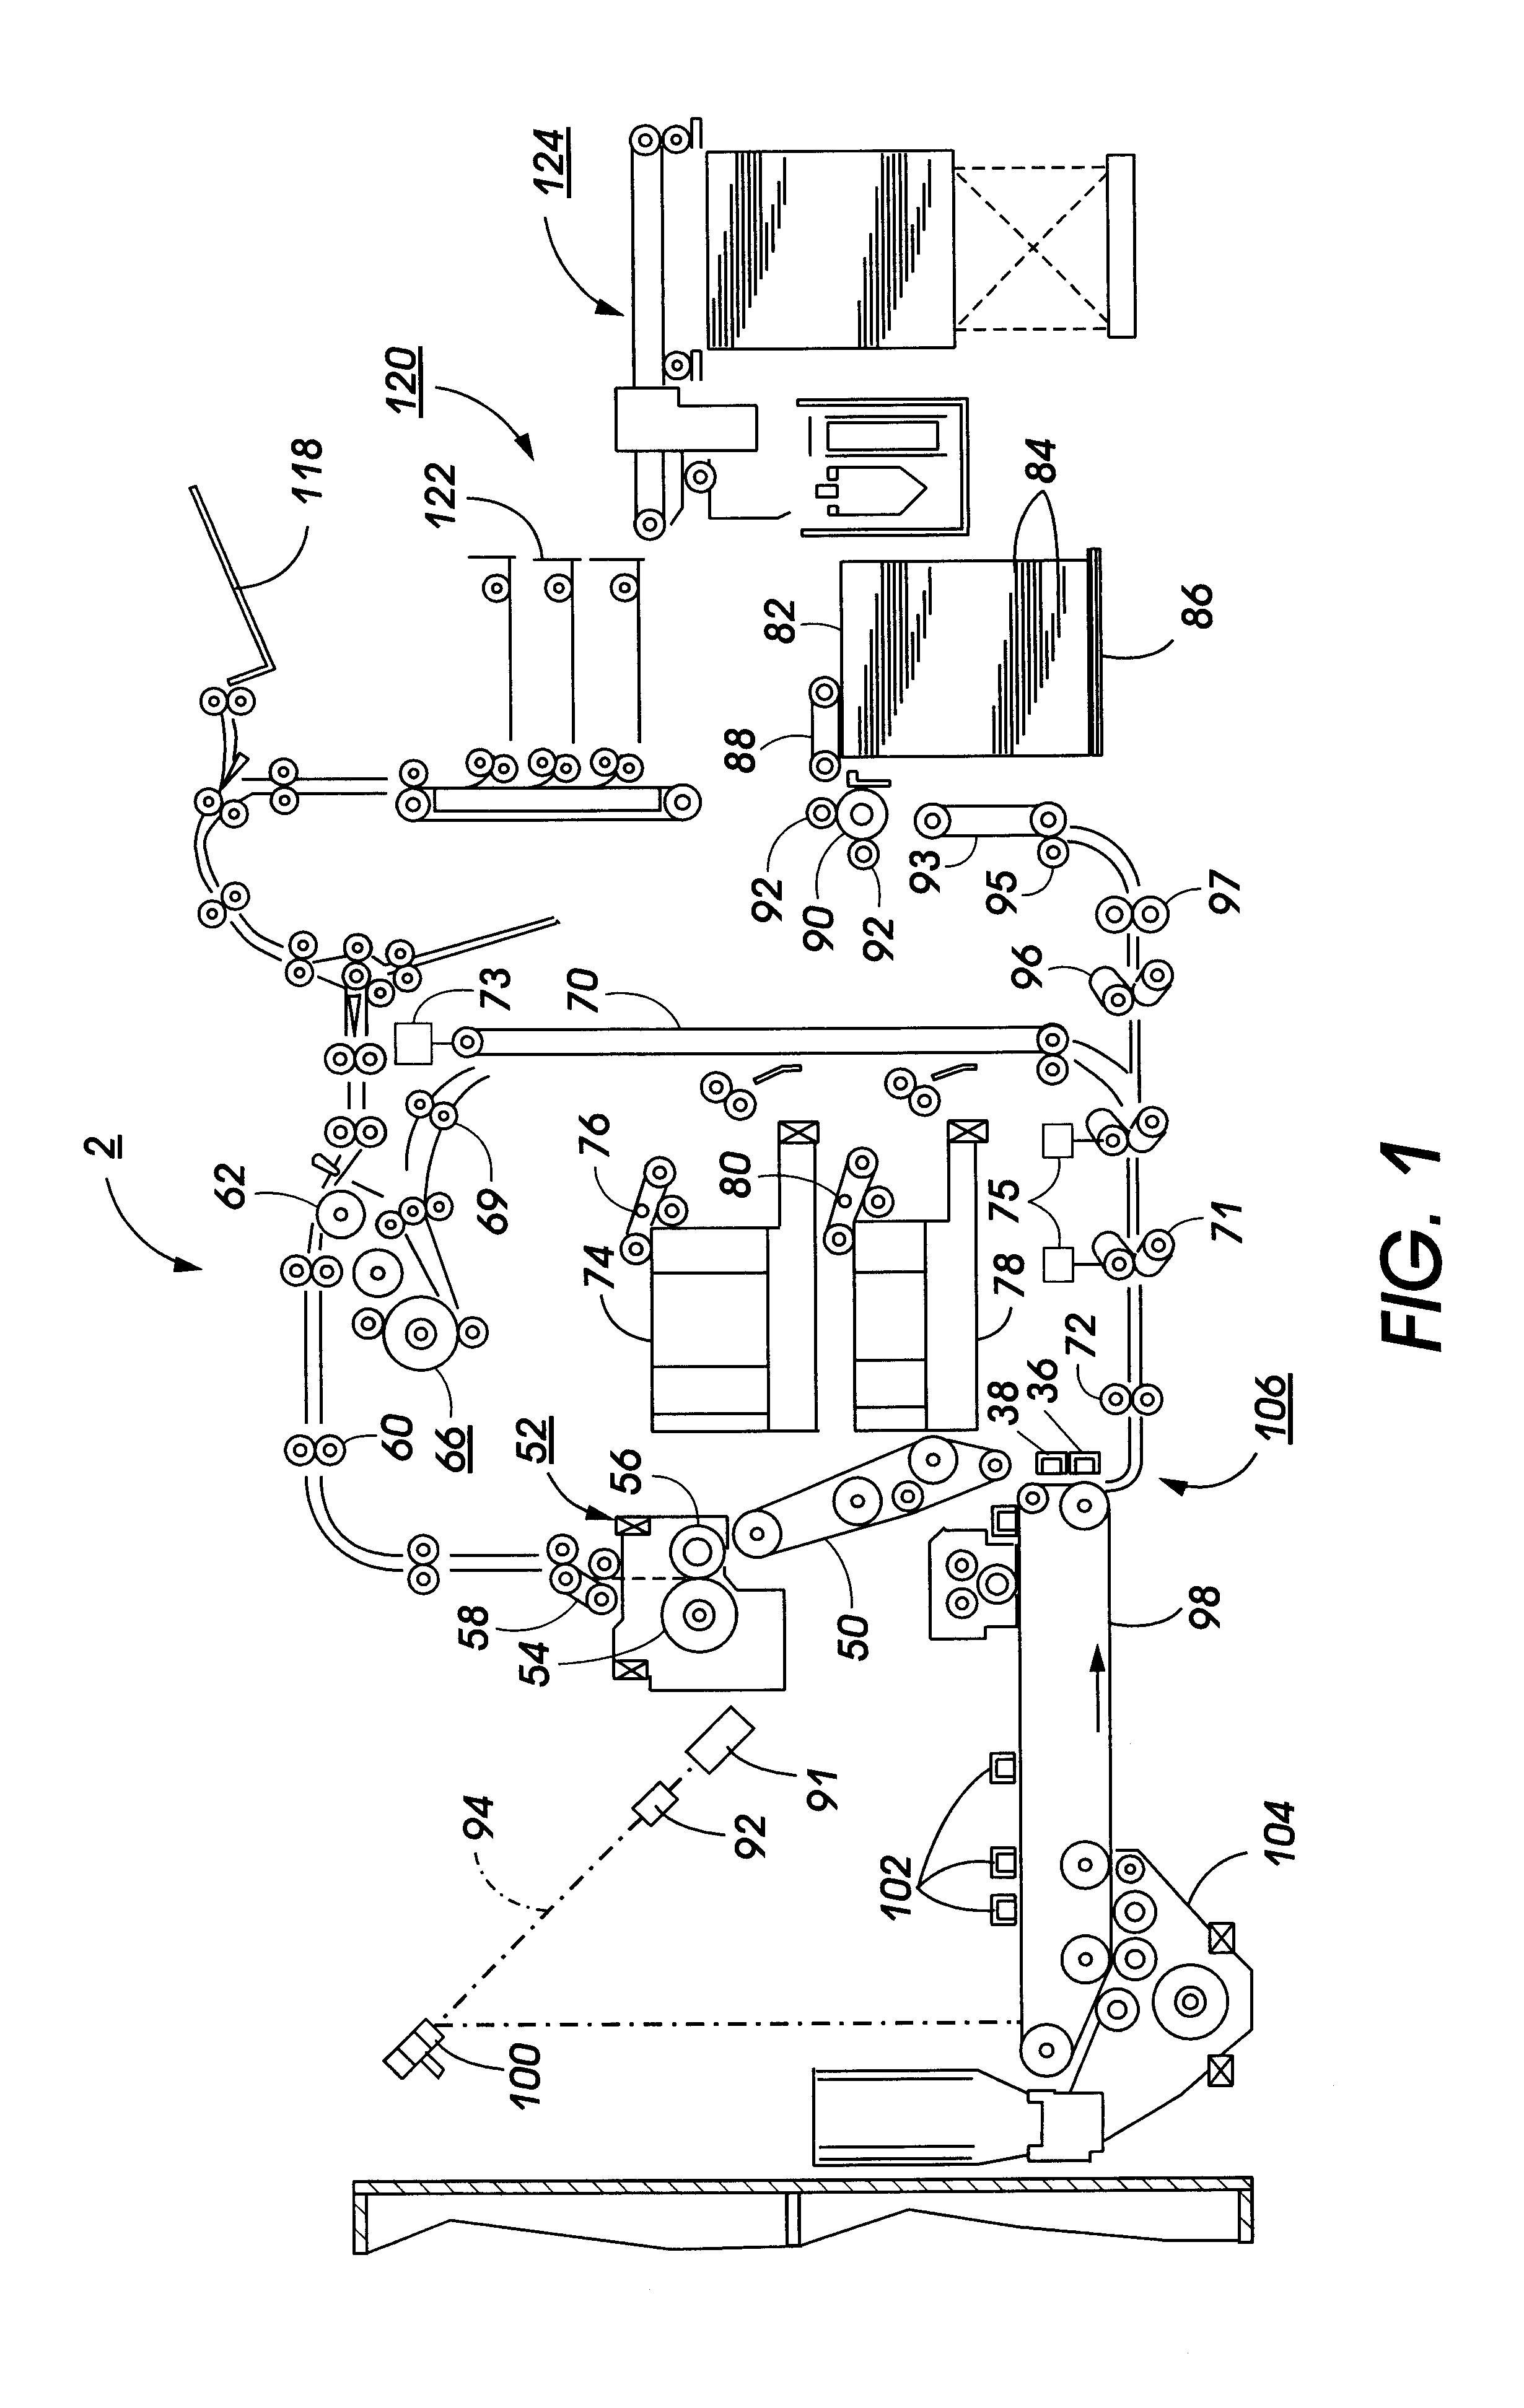 Interpaper spacing control in a media handling system